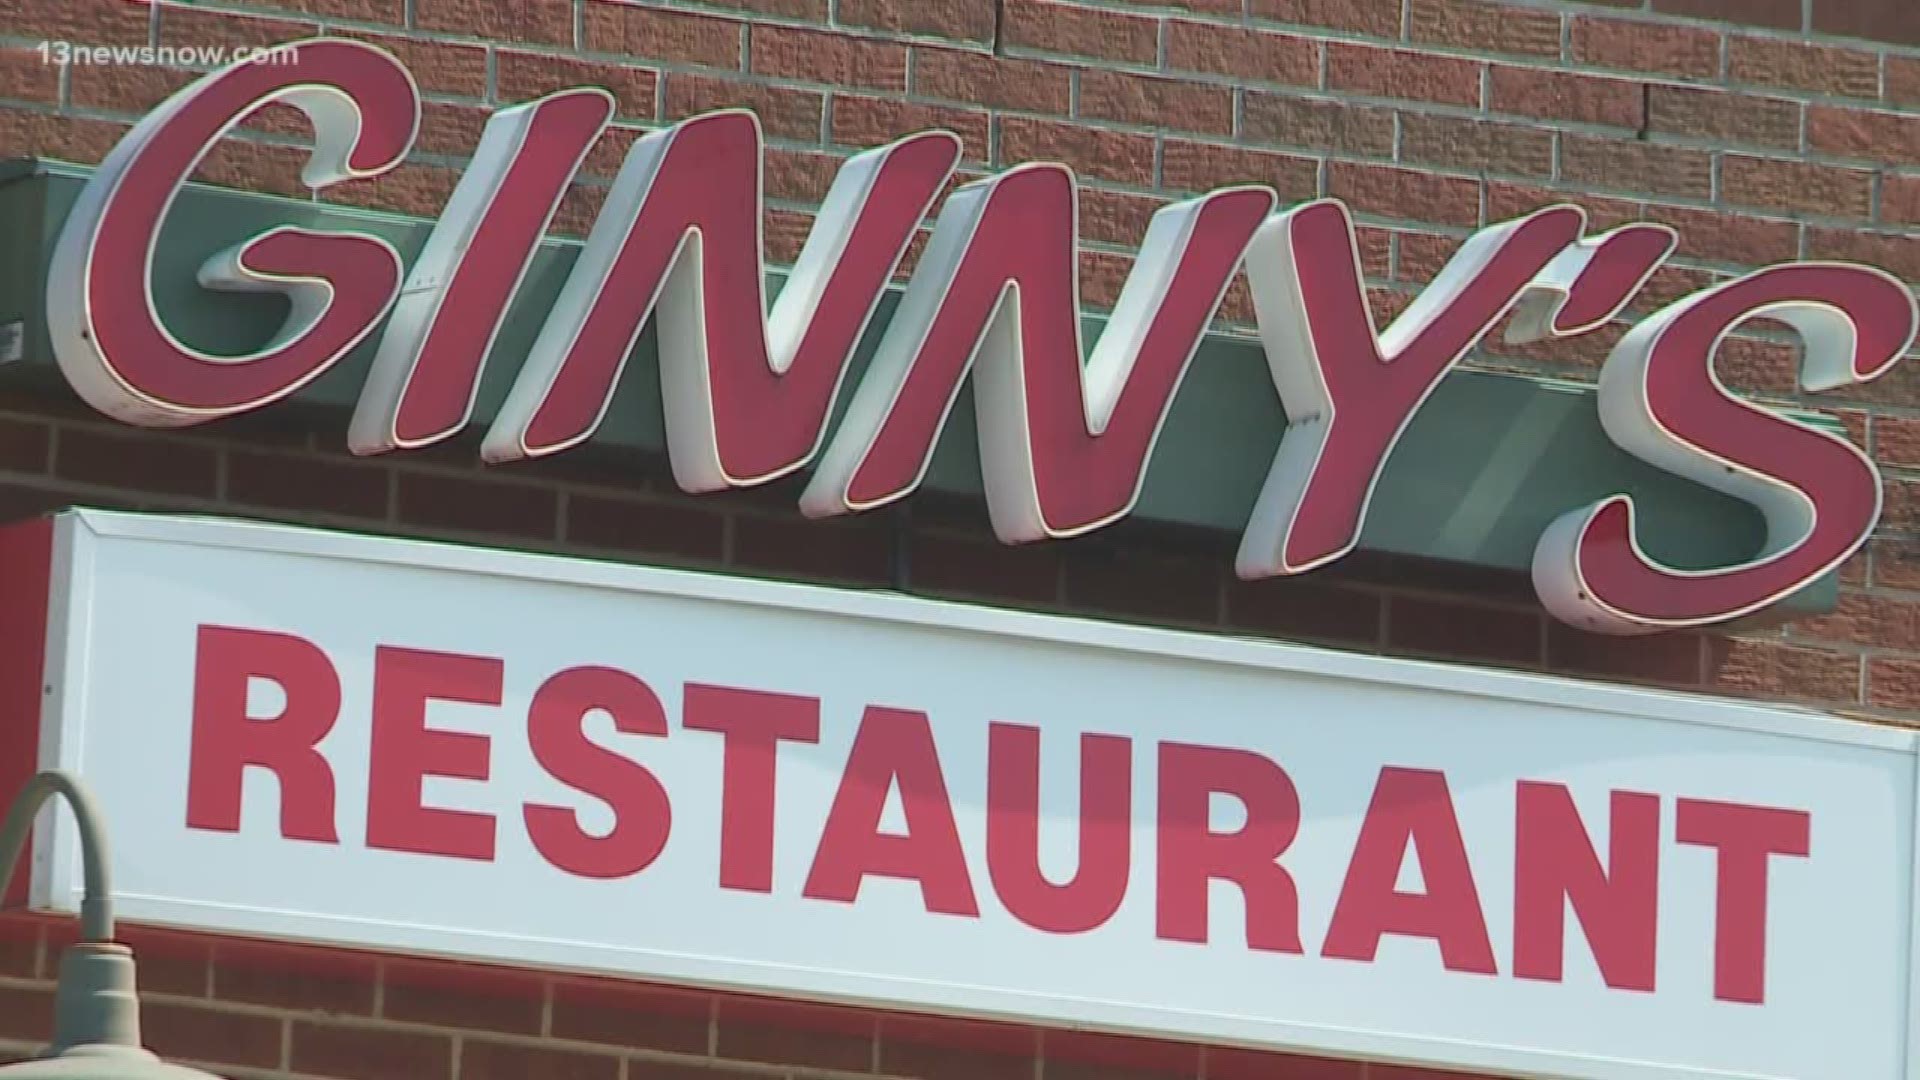 Health officials are warning anyone who ate at Ginny's Restaurant on George Washington Memorial Highway during the last week of August or on September 4, that they may have been exposed to Hepatitis A. Officials said to look out for jaundice, fever and fatigue if you've eaten at the restaurant recently.